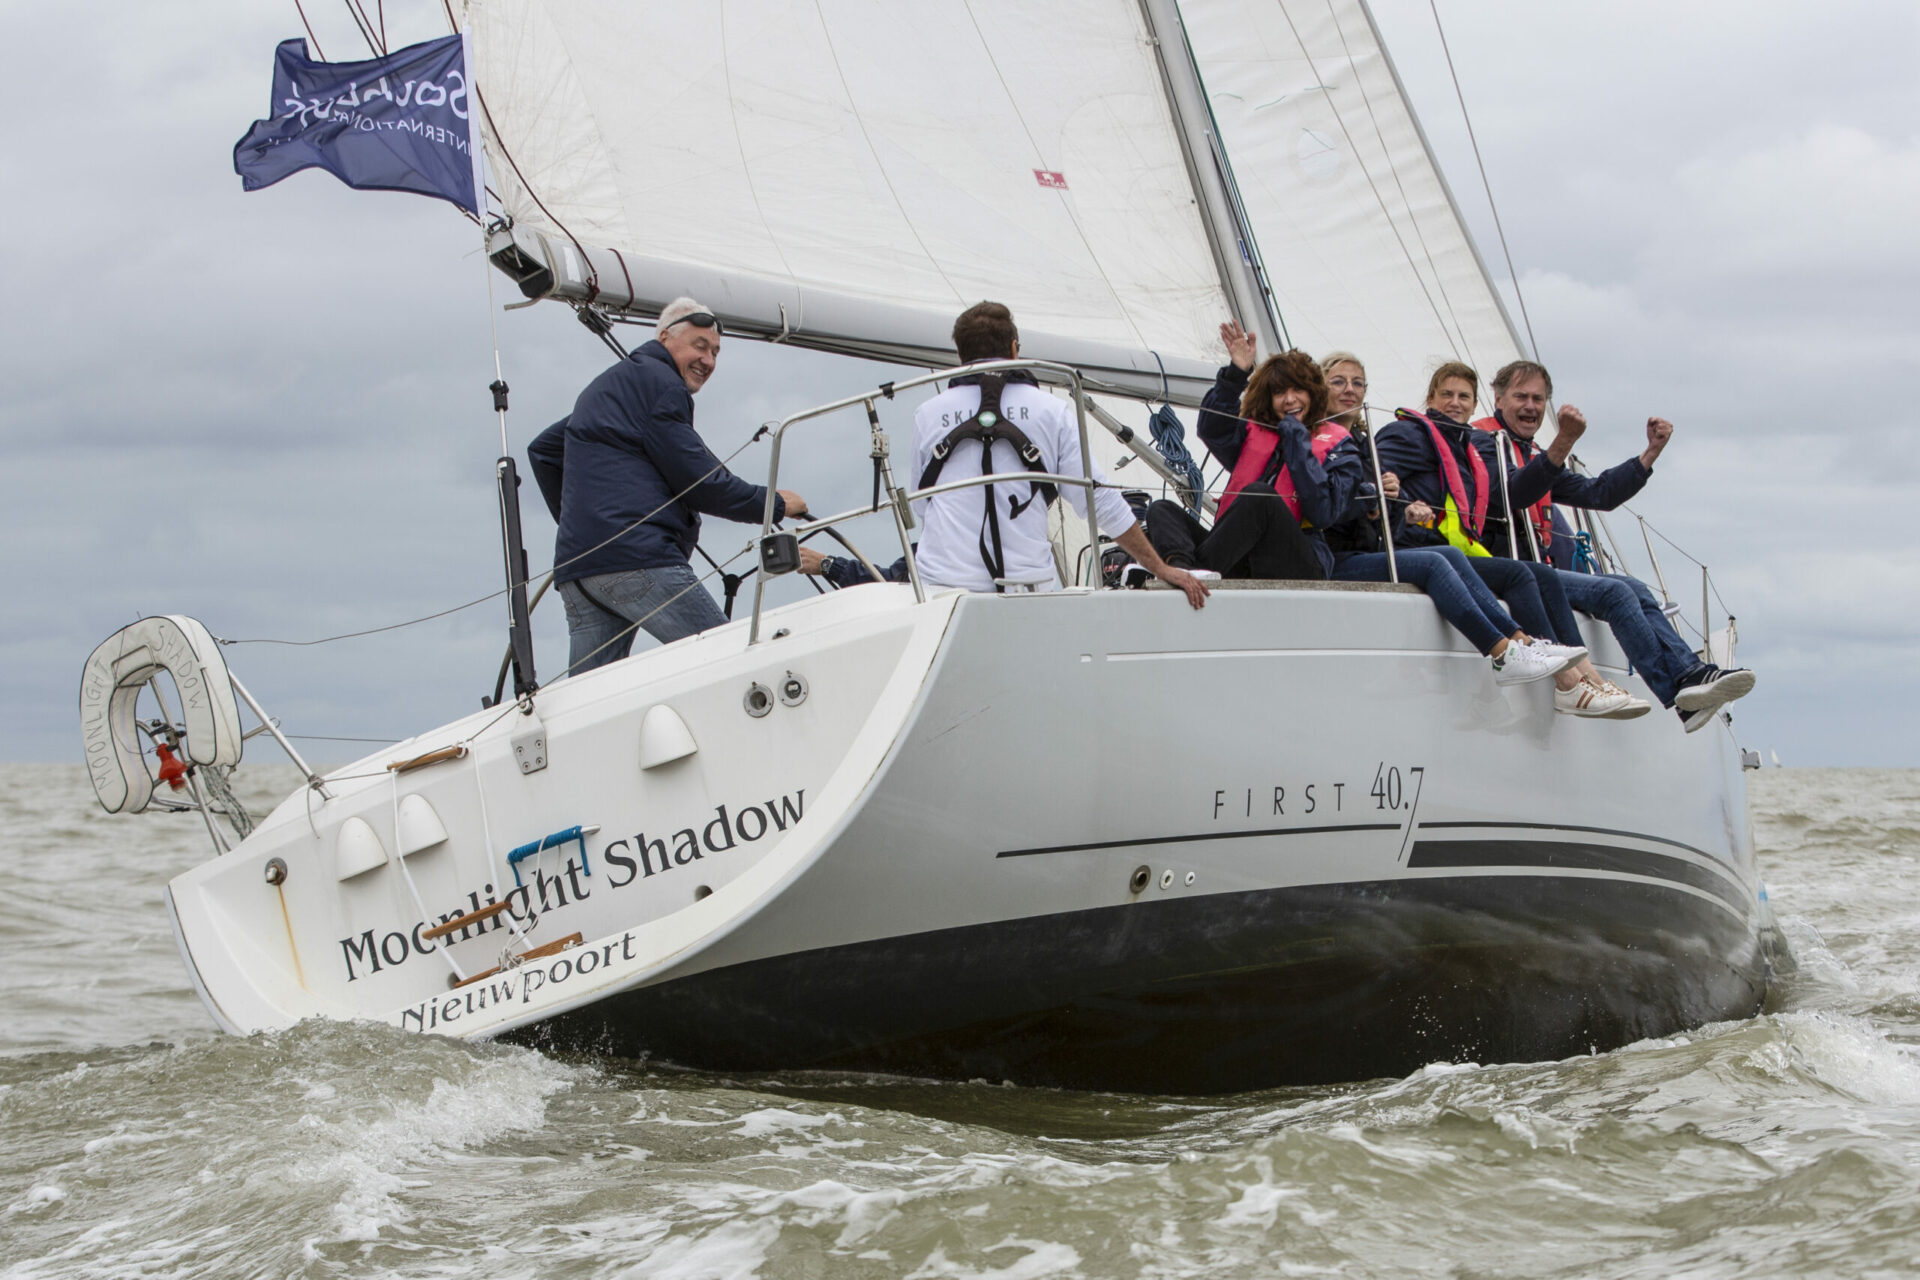 Second participation of Belgium Sotheby’s International Realty in this great sailing race between real estate leaders organized by FlexiSailing.